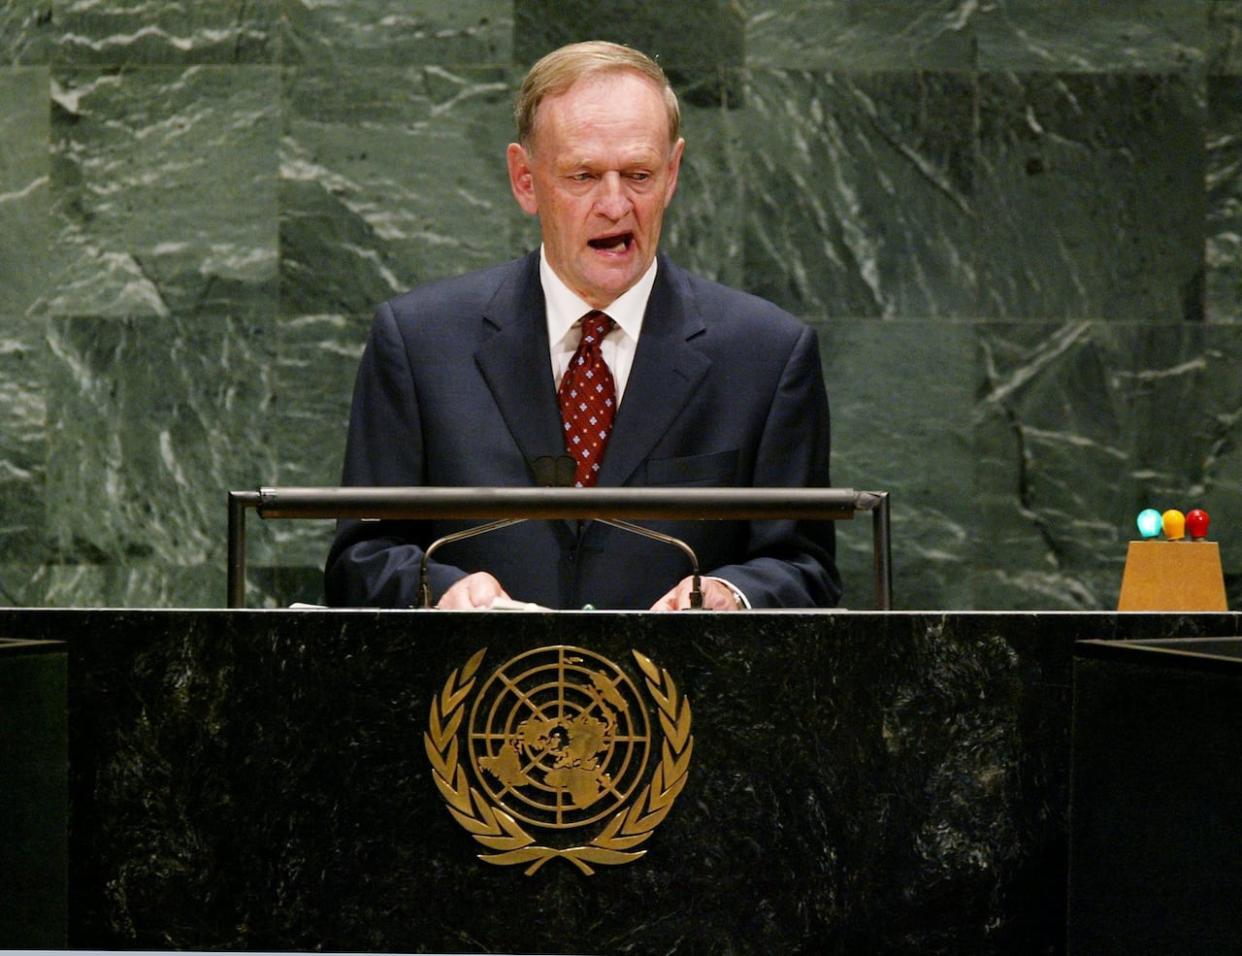 On Sept. 23, 2003, Prime Minister Jean Chrétien addresses the United Nations General Assembly in New York City. At the time, his government was quietly working with Australia on a substitute draft Declaration on the Rights of Indigenous Peoples. (Andrew Vaughan/Canadian Press - image credit)